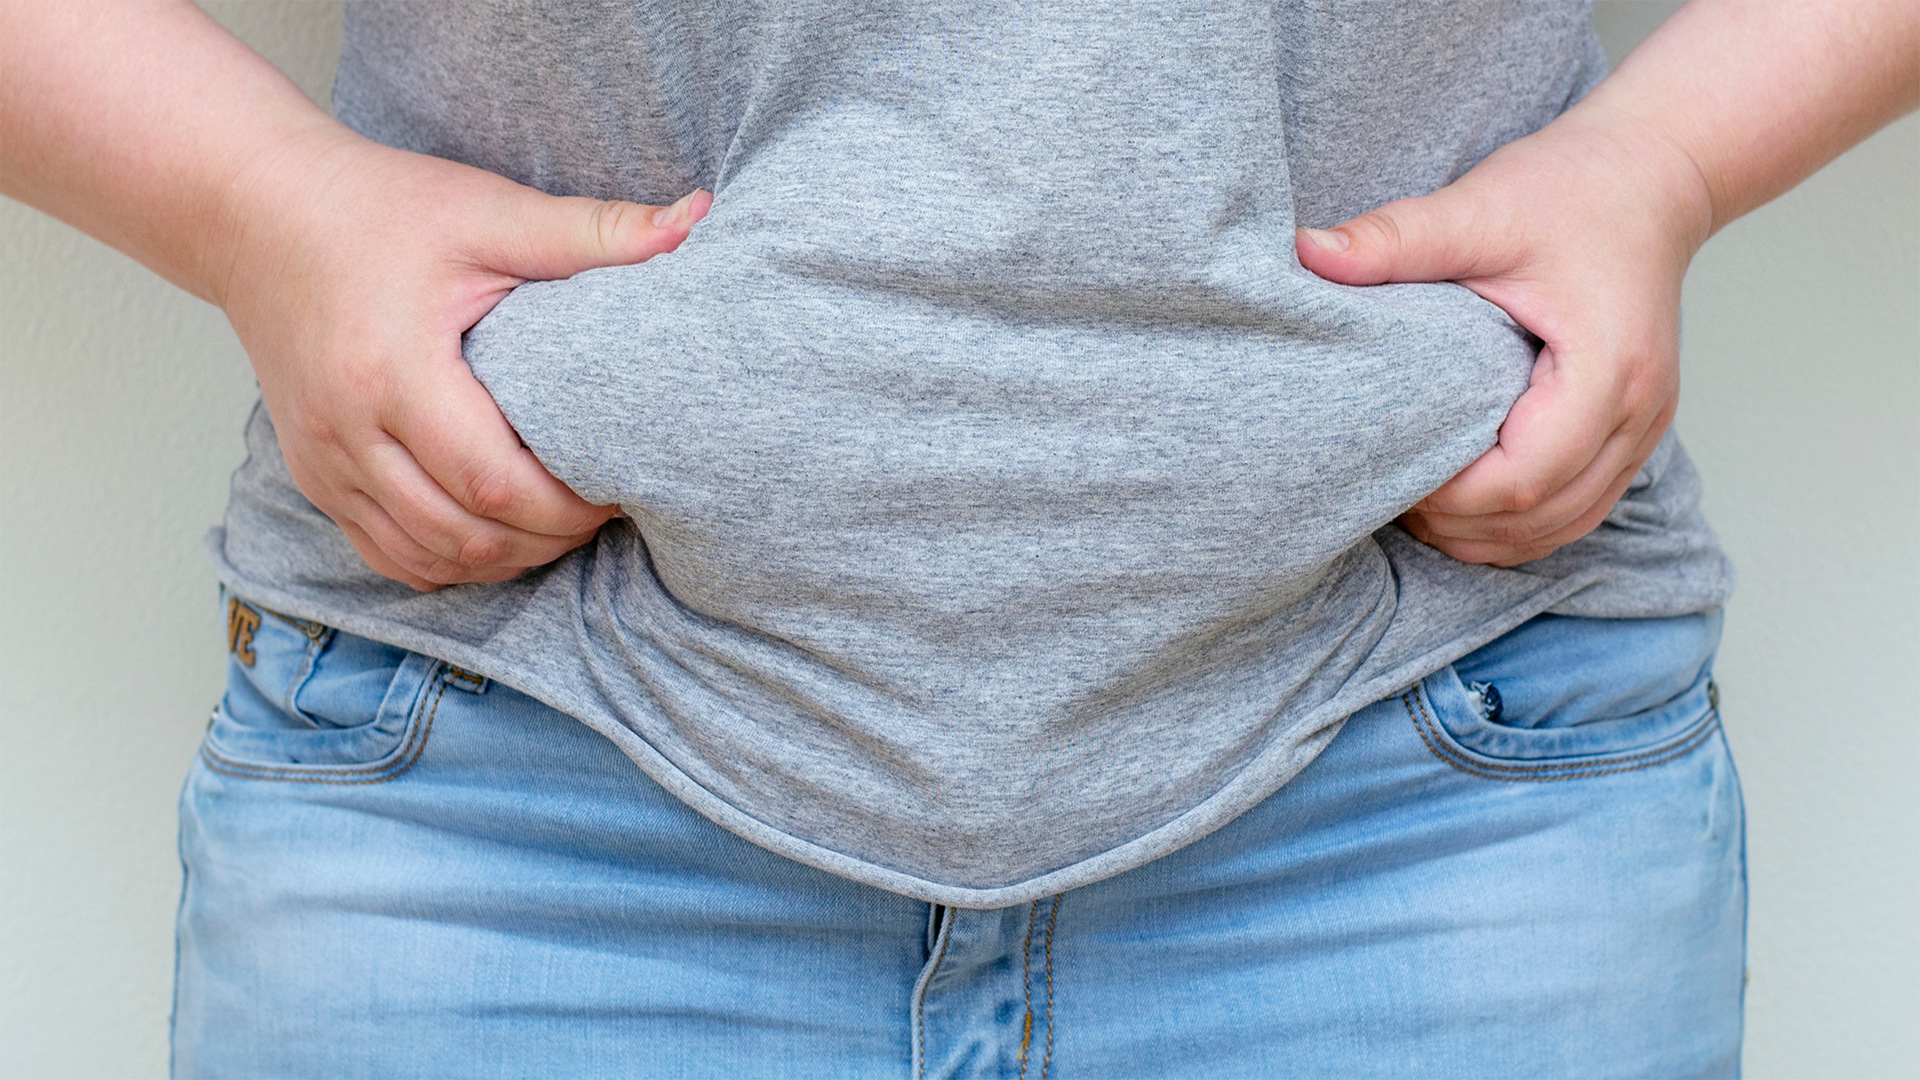 Excess belly (visceral) fat disrupts metabolism, leading to insulin resistance and type 2 diabetes.